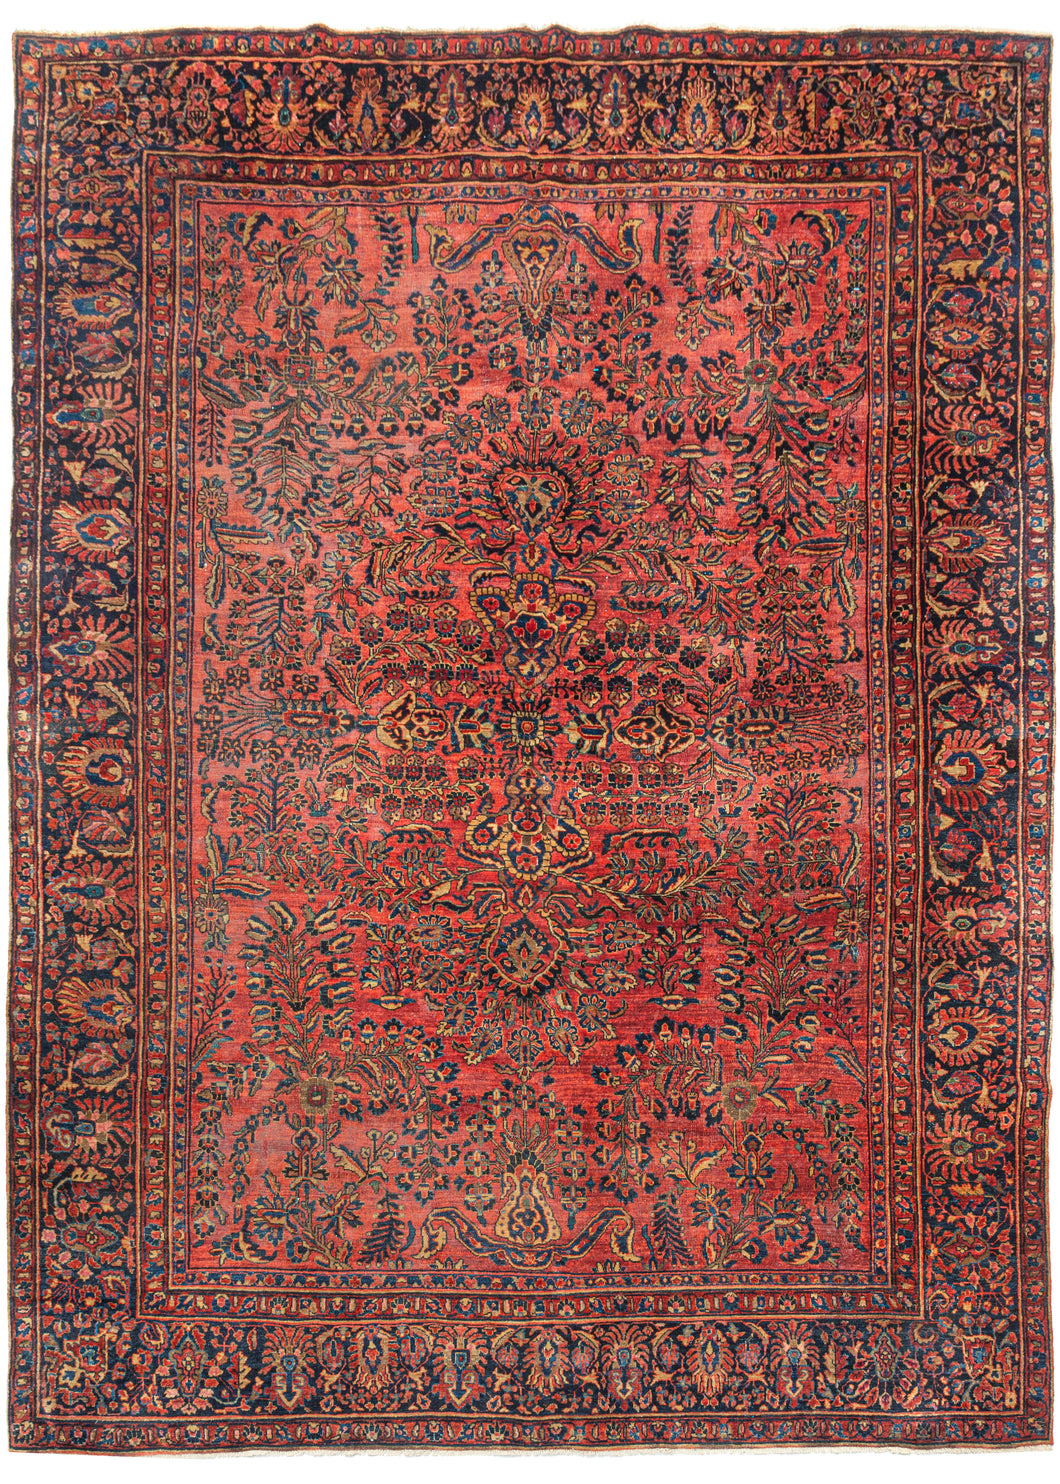 This Sarouk Rug features a curvilinear floral design on a soft raspberry red field. The floral work is intricate and an excellent example of the type of floral sprays Sarouk rugs are known for. It features a central motif that blends into the pattern without dominating the composition. The main border features a palmette and blossom design on a navy ground. This classically patterned rug should last for generations to come.